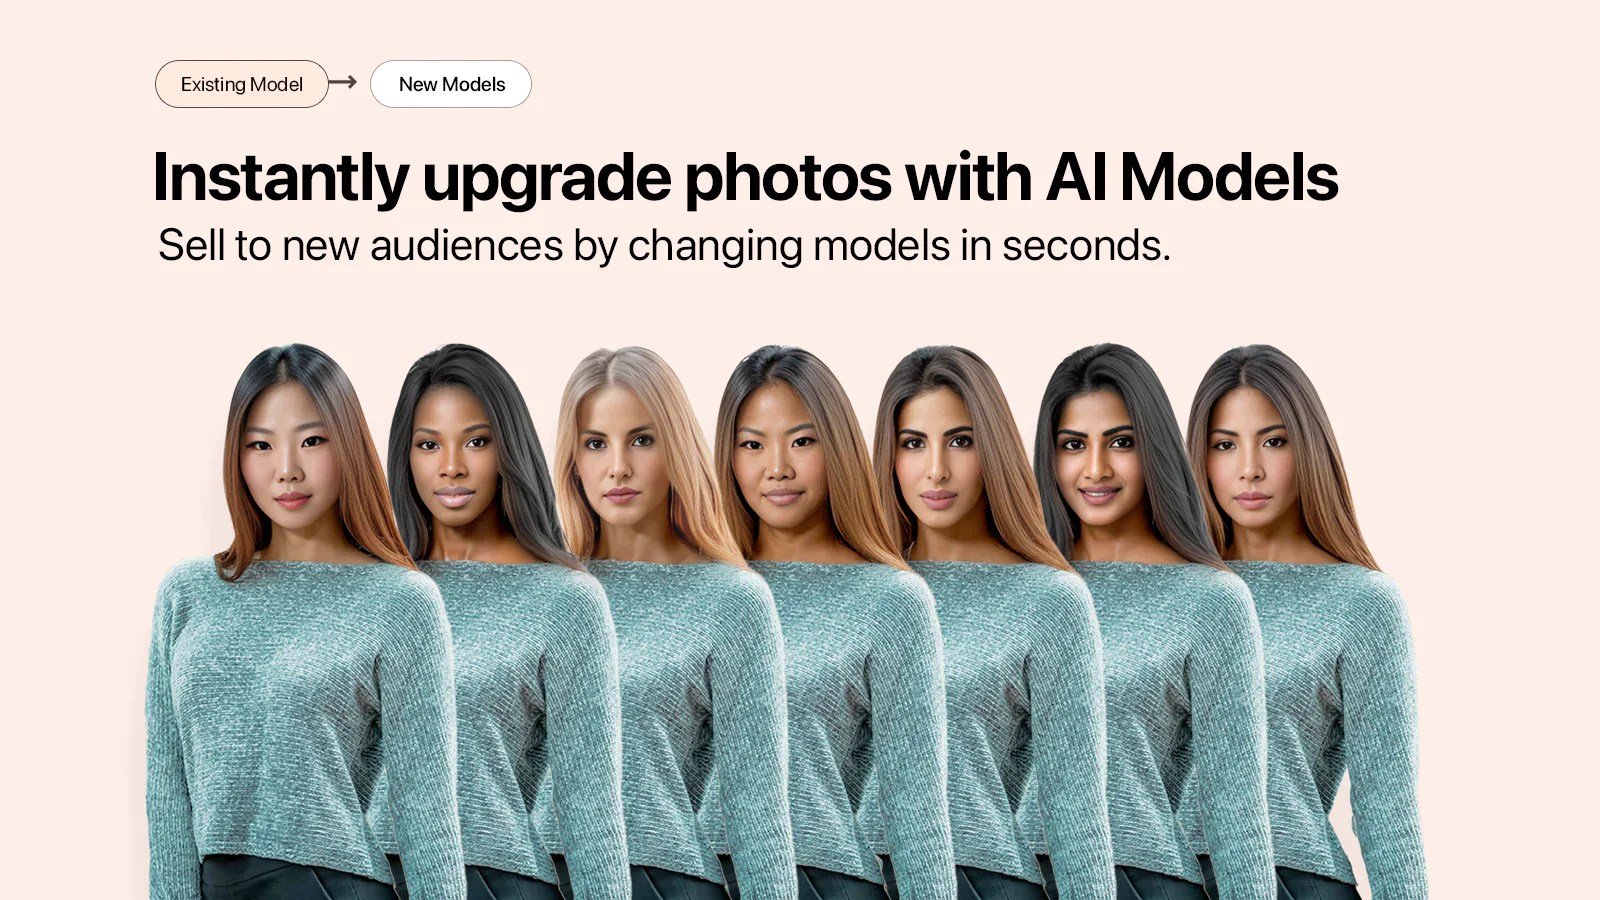 onmodel-ai-models-photos-instant-upgrade